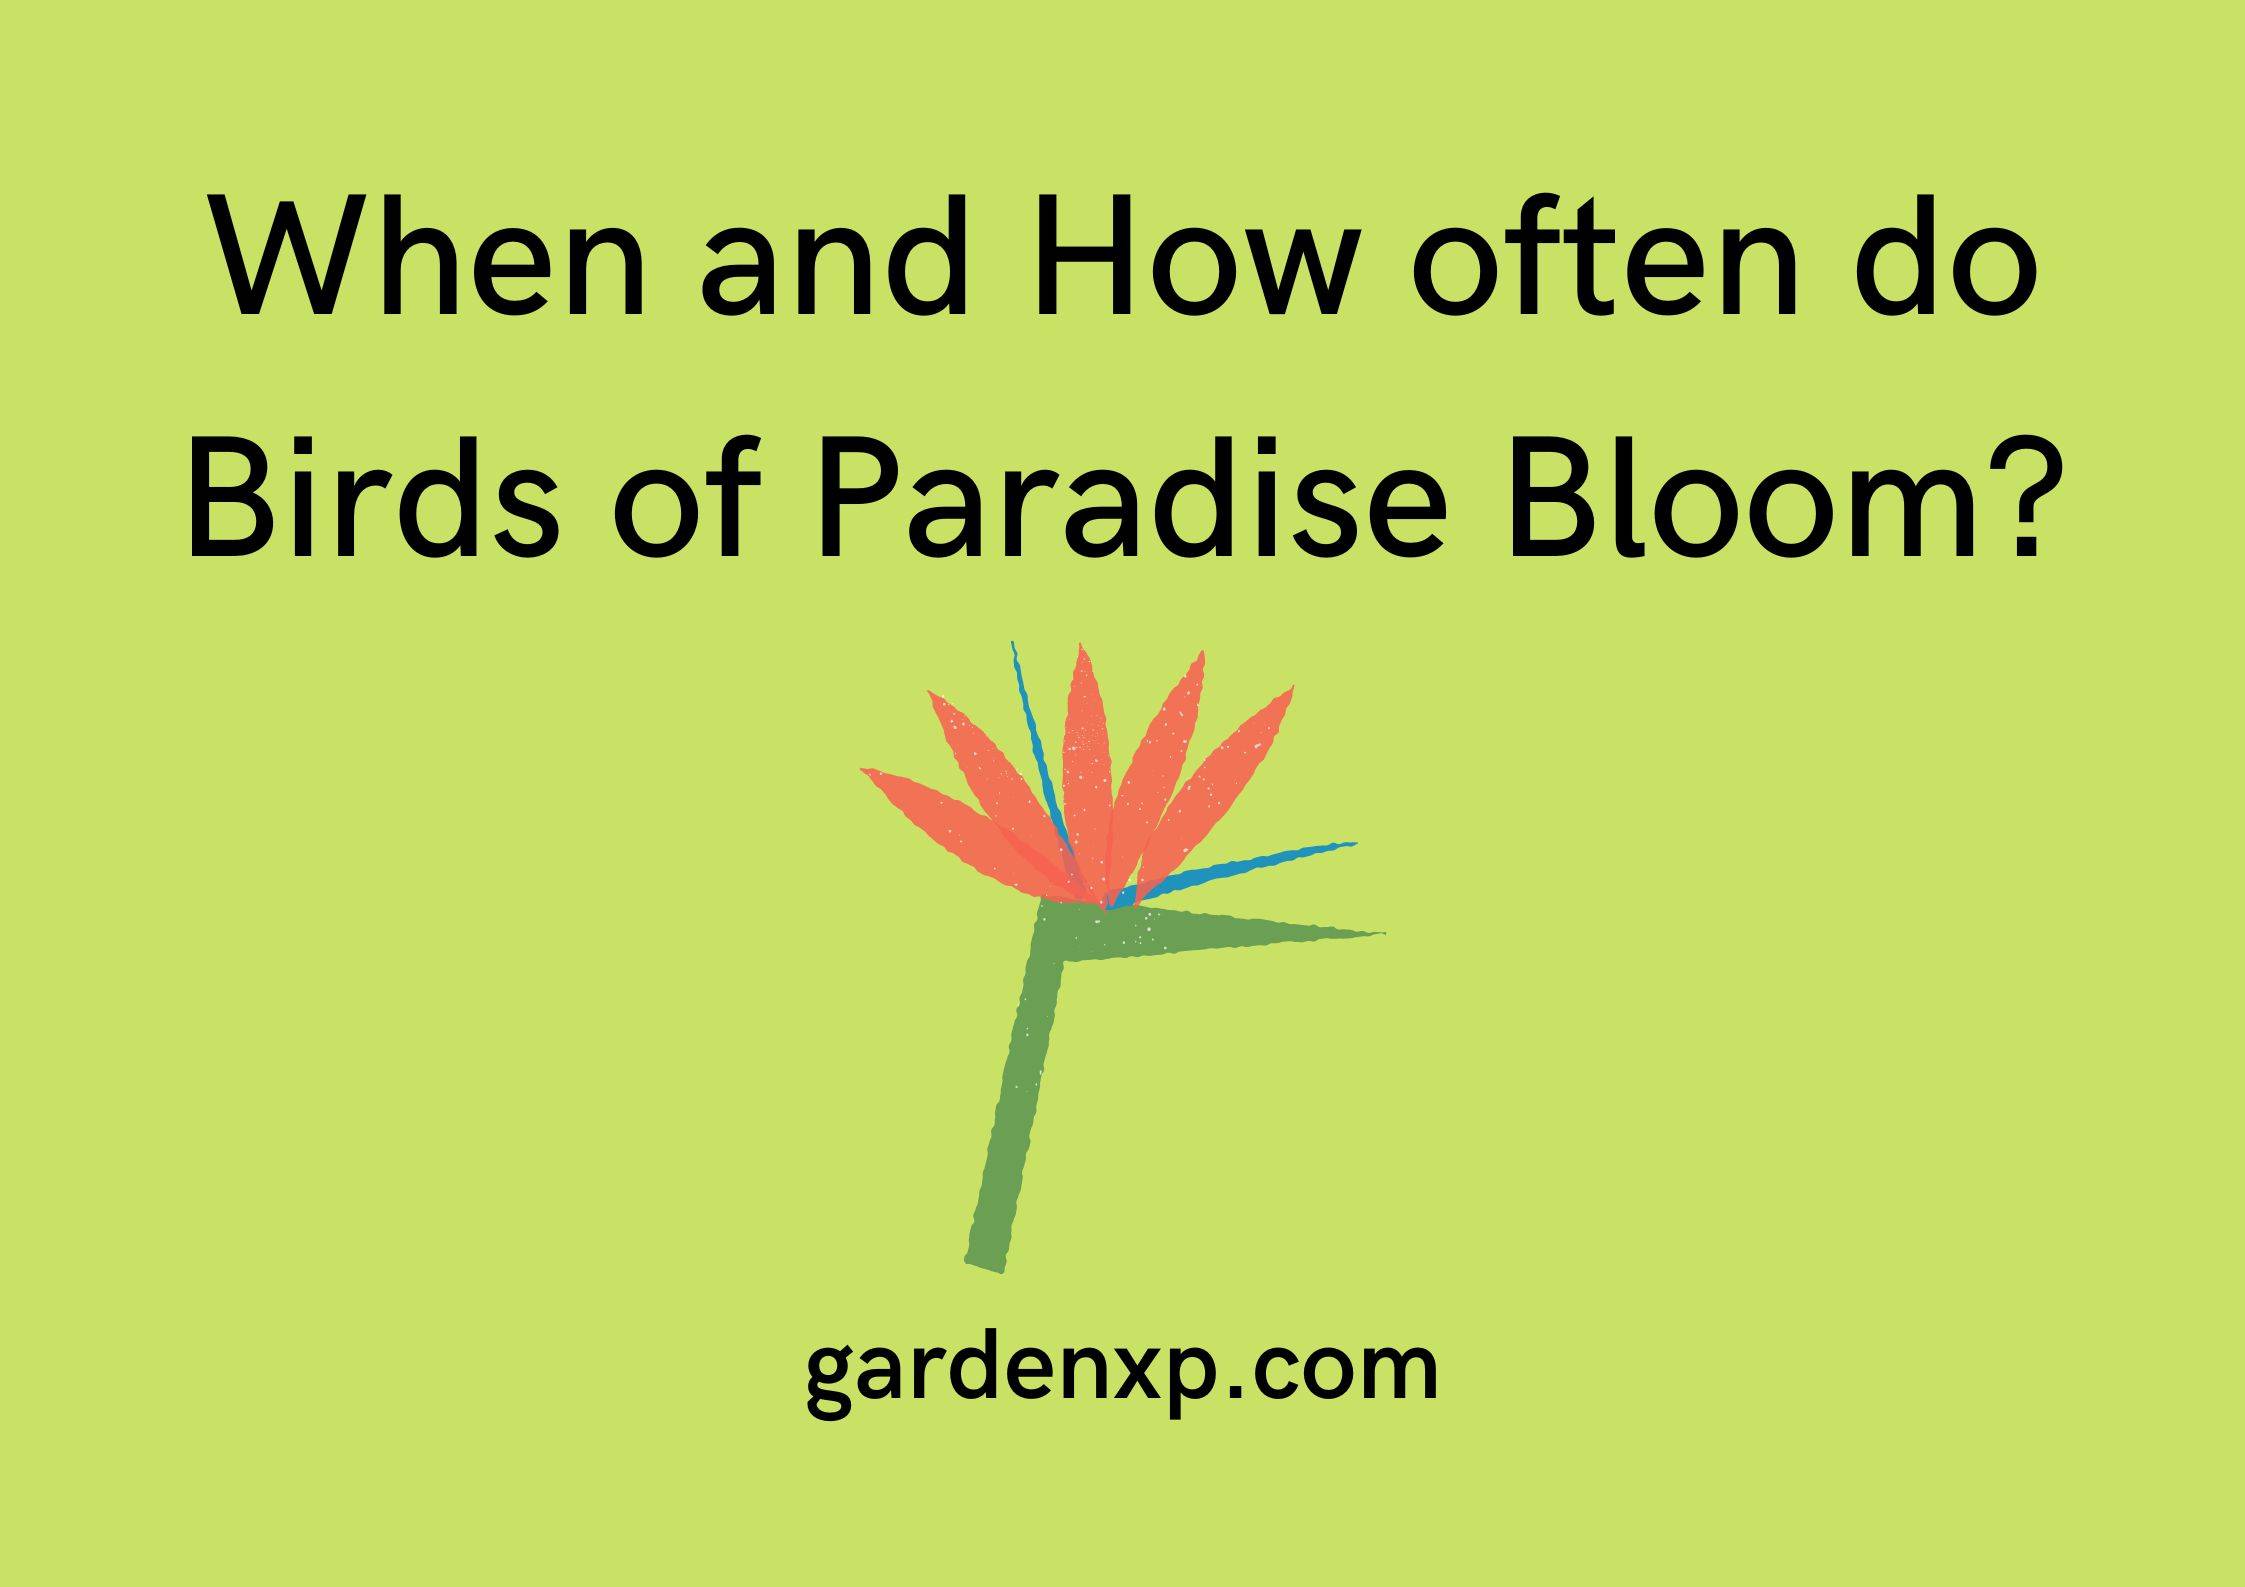 When and How often do Birds of Paradise Bloom?